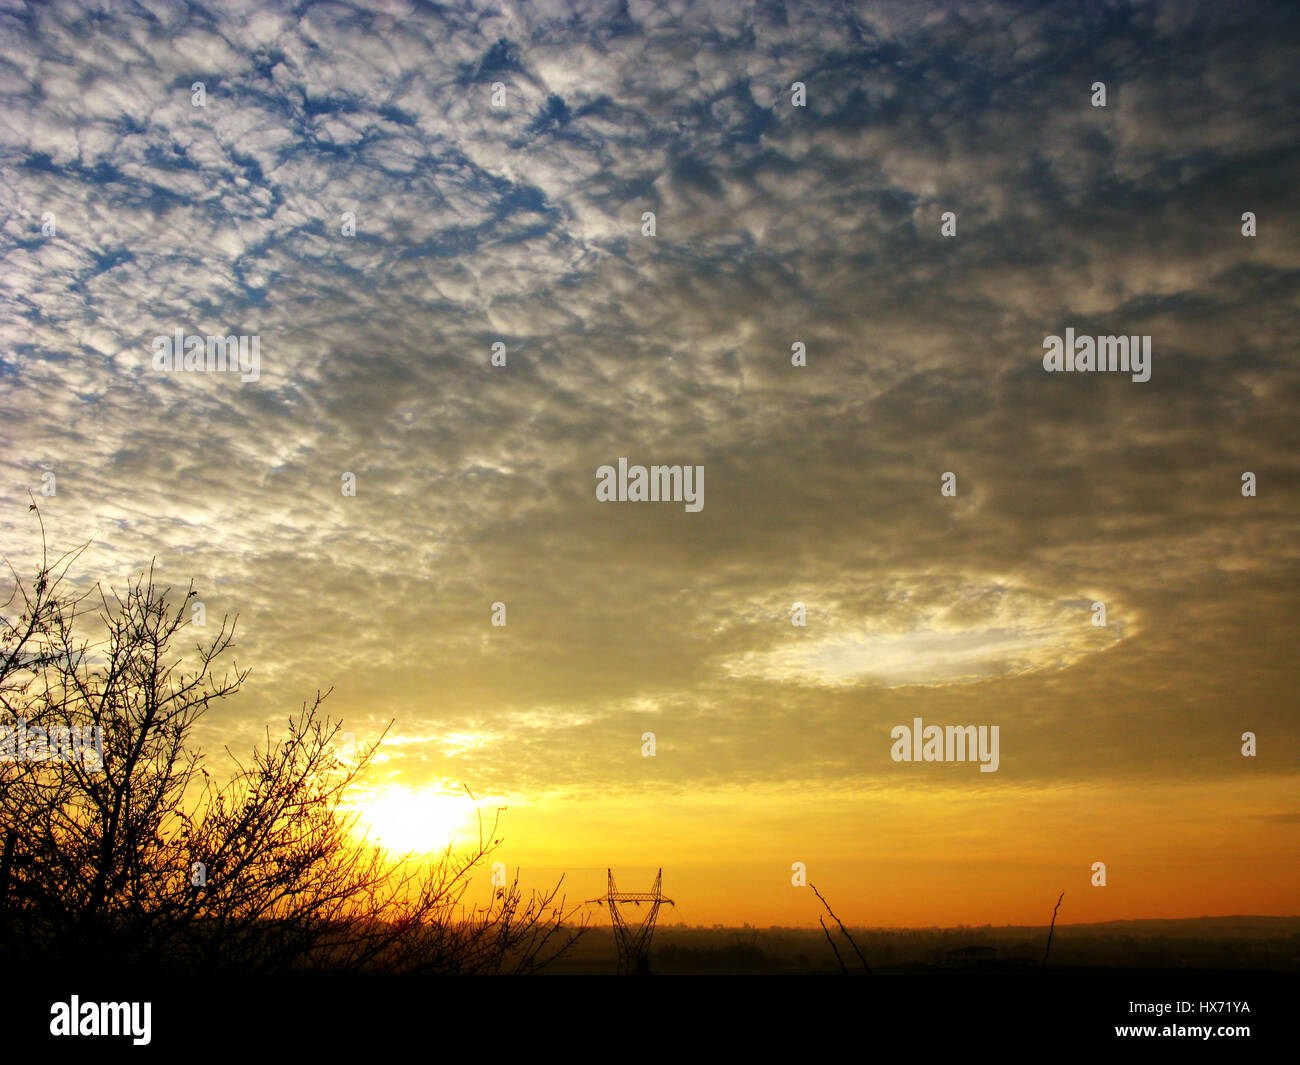 A singular cloud formation in a mackerel sky at sunset Stock Photo